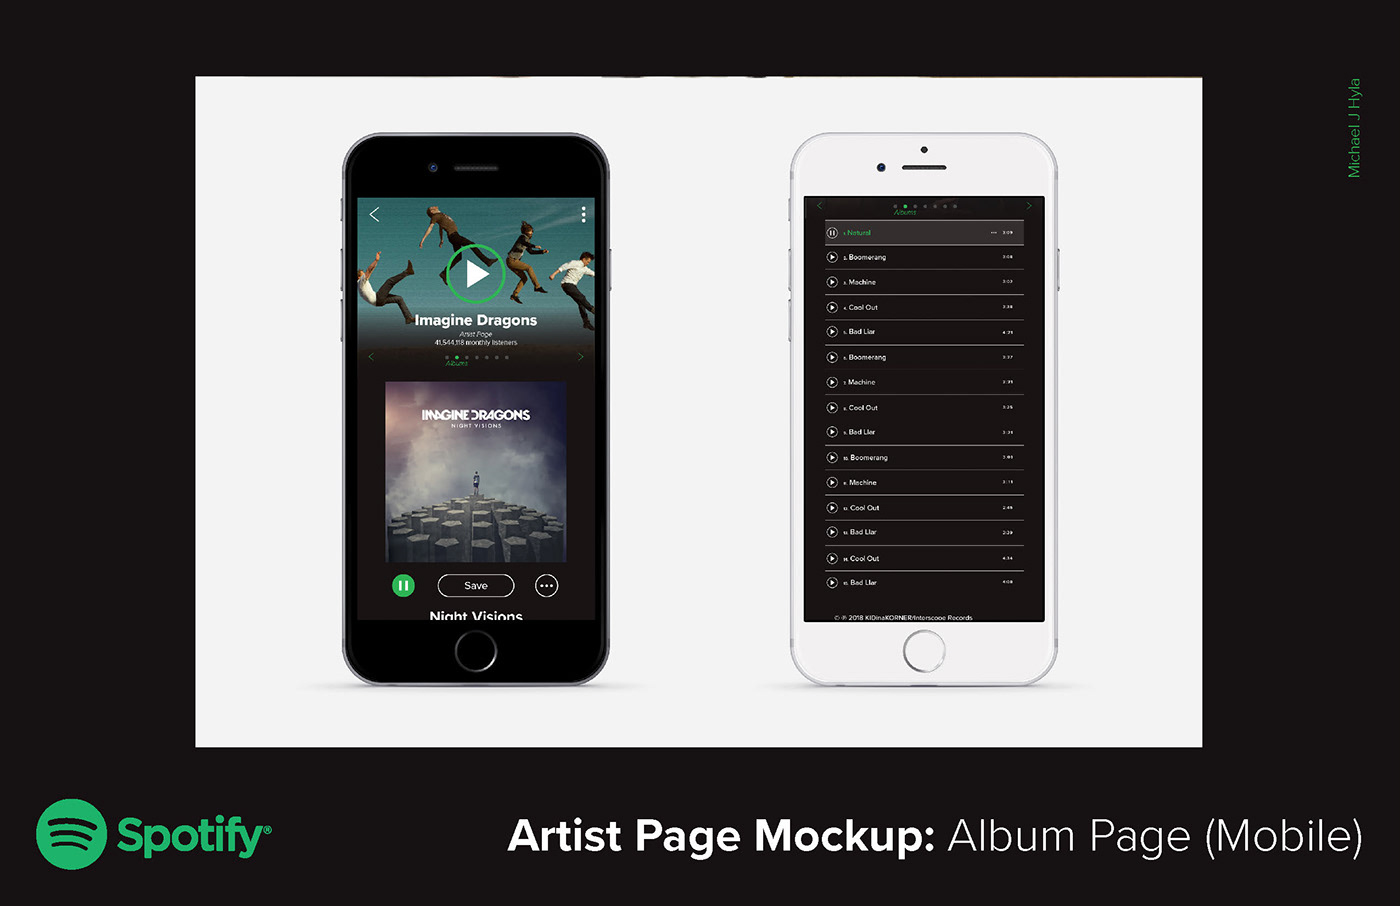 spotify music Streaming streaming service brand guidelines musicians Layout user interface user experience